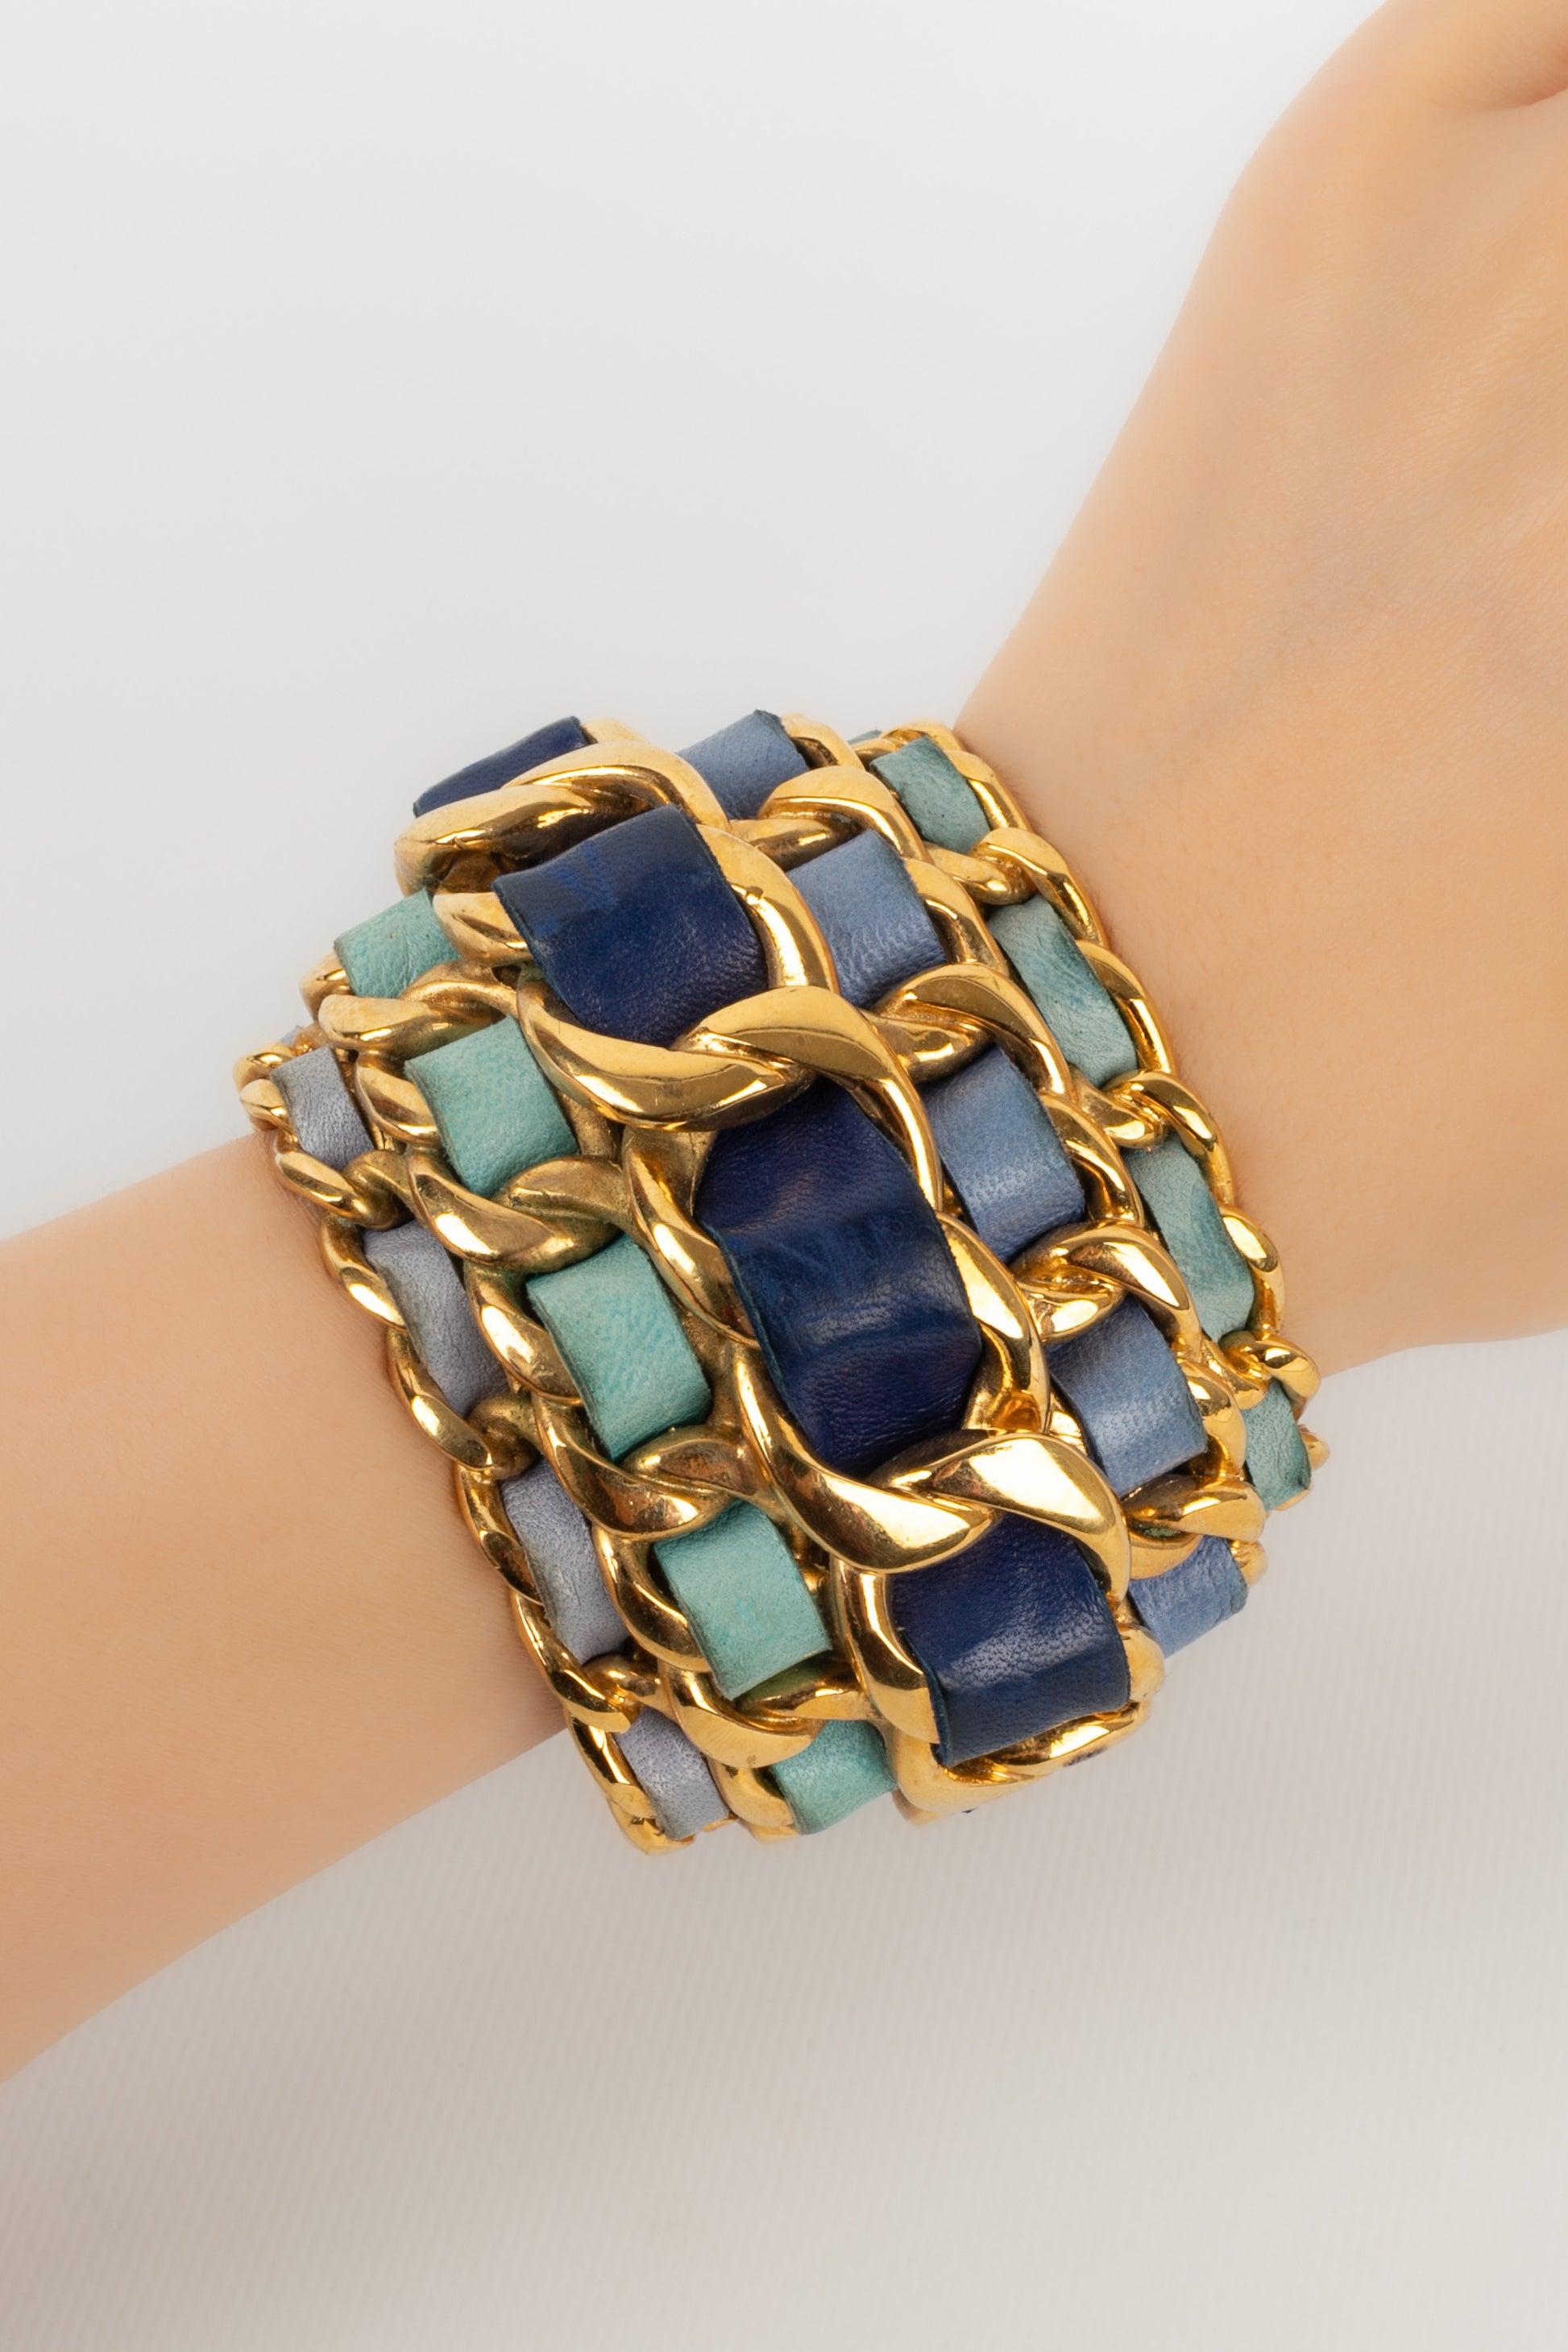 Chanel Cuff Bracelet in Golden Metal Interlaced with Blue Tone Leather, 1991 For Sale 6